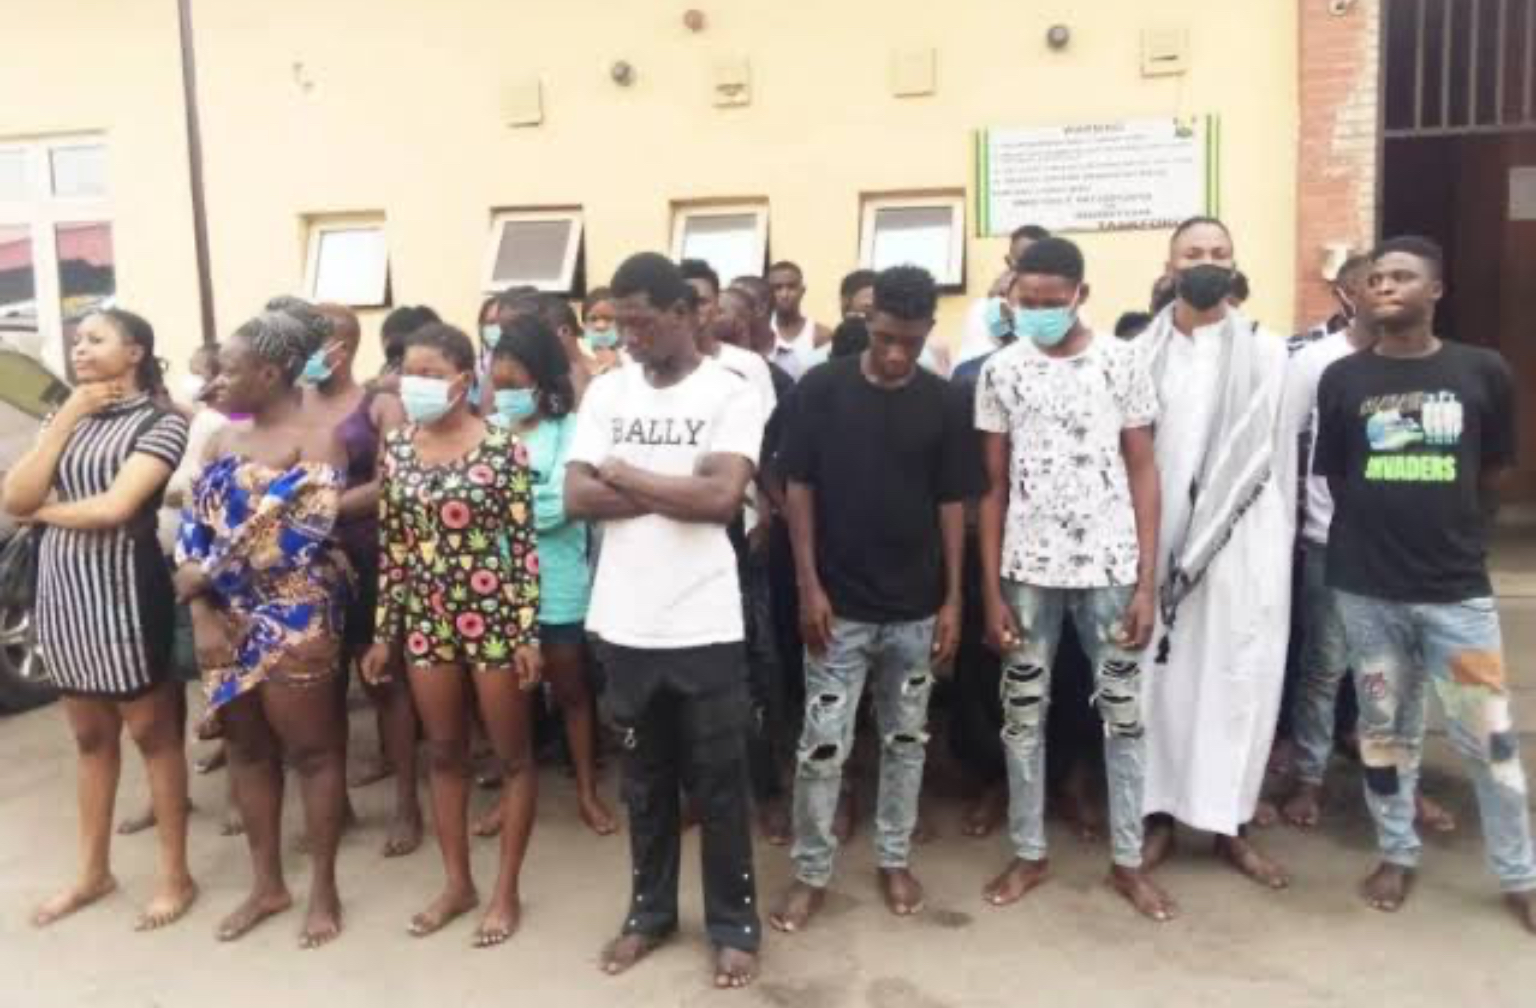 A Mobile Court in Benin, the Edo State capital, on Friday convicted 33 people for flouting the coronavirus protocols in the State. NAN reports that the prosecuting counsel, Mr G. O. Odeyibo told the court that the 33 accused who subsequently pleaded guilty were arrested within the Benin metropolis. Oyedibo said that 21 accused persons were arrested for not wearing face masks and for failing to maintain social gaps in public as directed by the Federal government. According to him, six out of the 33 persons were arrested for not disposing their wastes properly at Oba Market. Delivering judgement, Chief Magistrate Rusberth Imafidon convicted the 21 face mask violators and directed them to do community service for three hours daily for two days without any option of fine. He also sentenced the six convicts, who did not dispose their wastes properly at the Oba Market, to do community service of three hours for one day. The Chief Magistrate pointed out that doing community service was in tune with non-custodian sentence. He directed the correctional officers to oversee the convicts while serving their punishments.